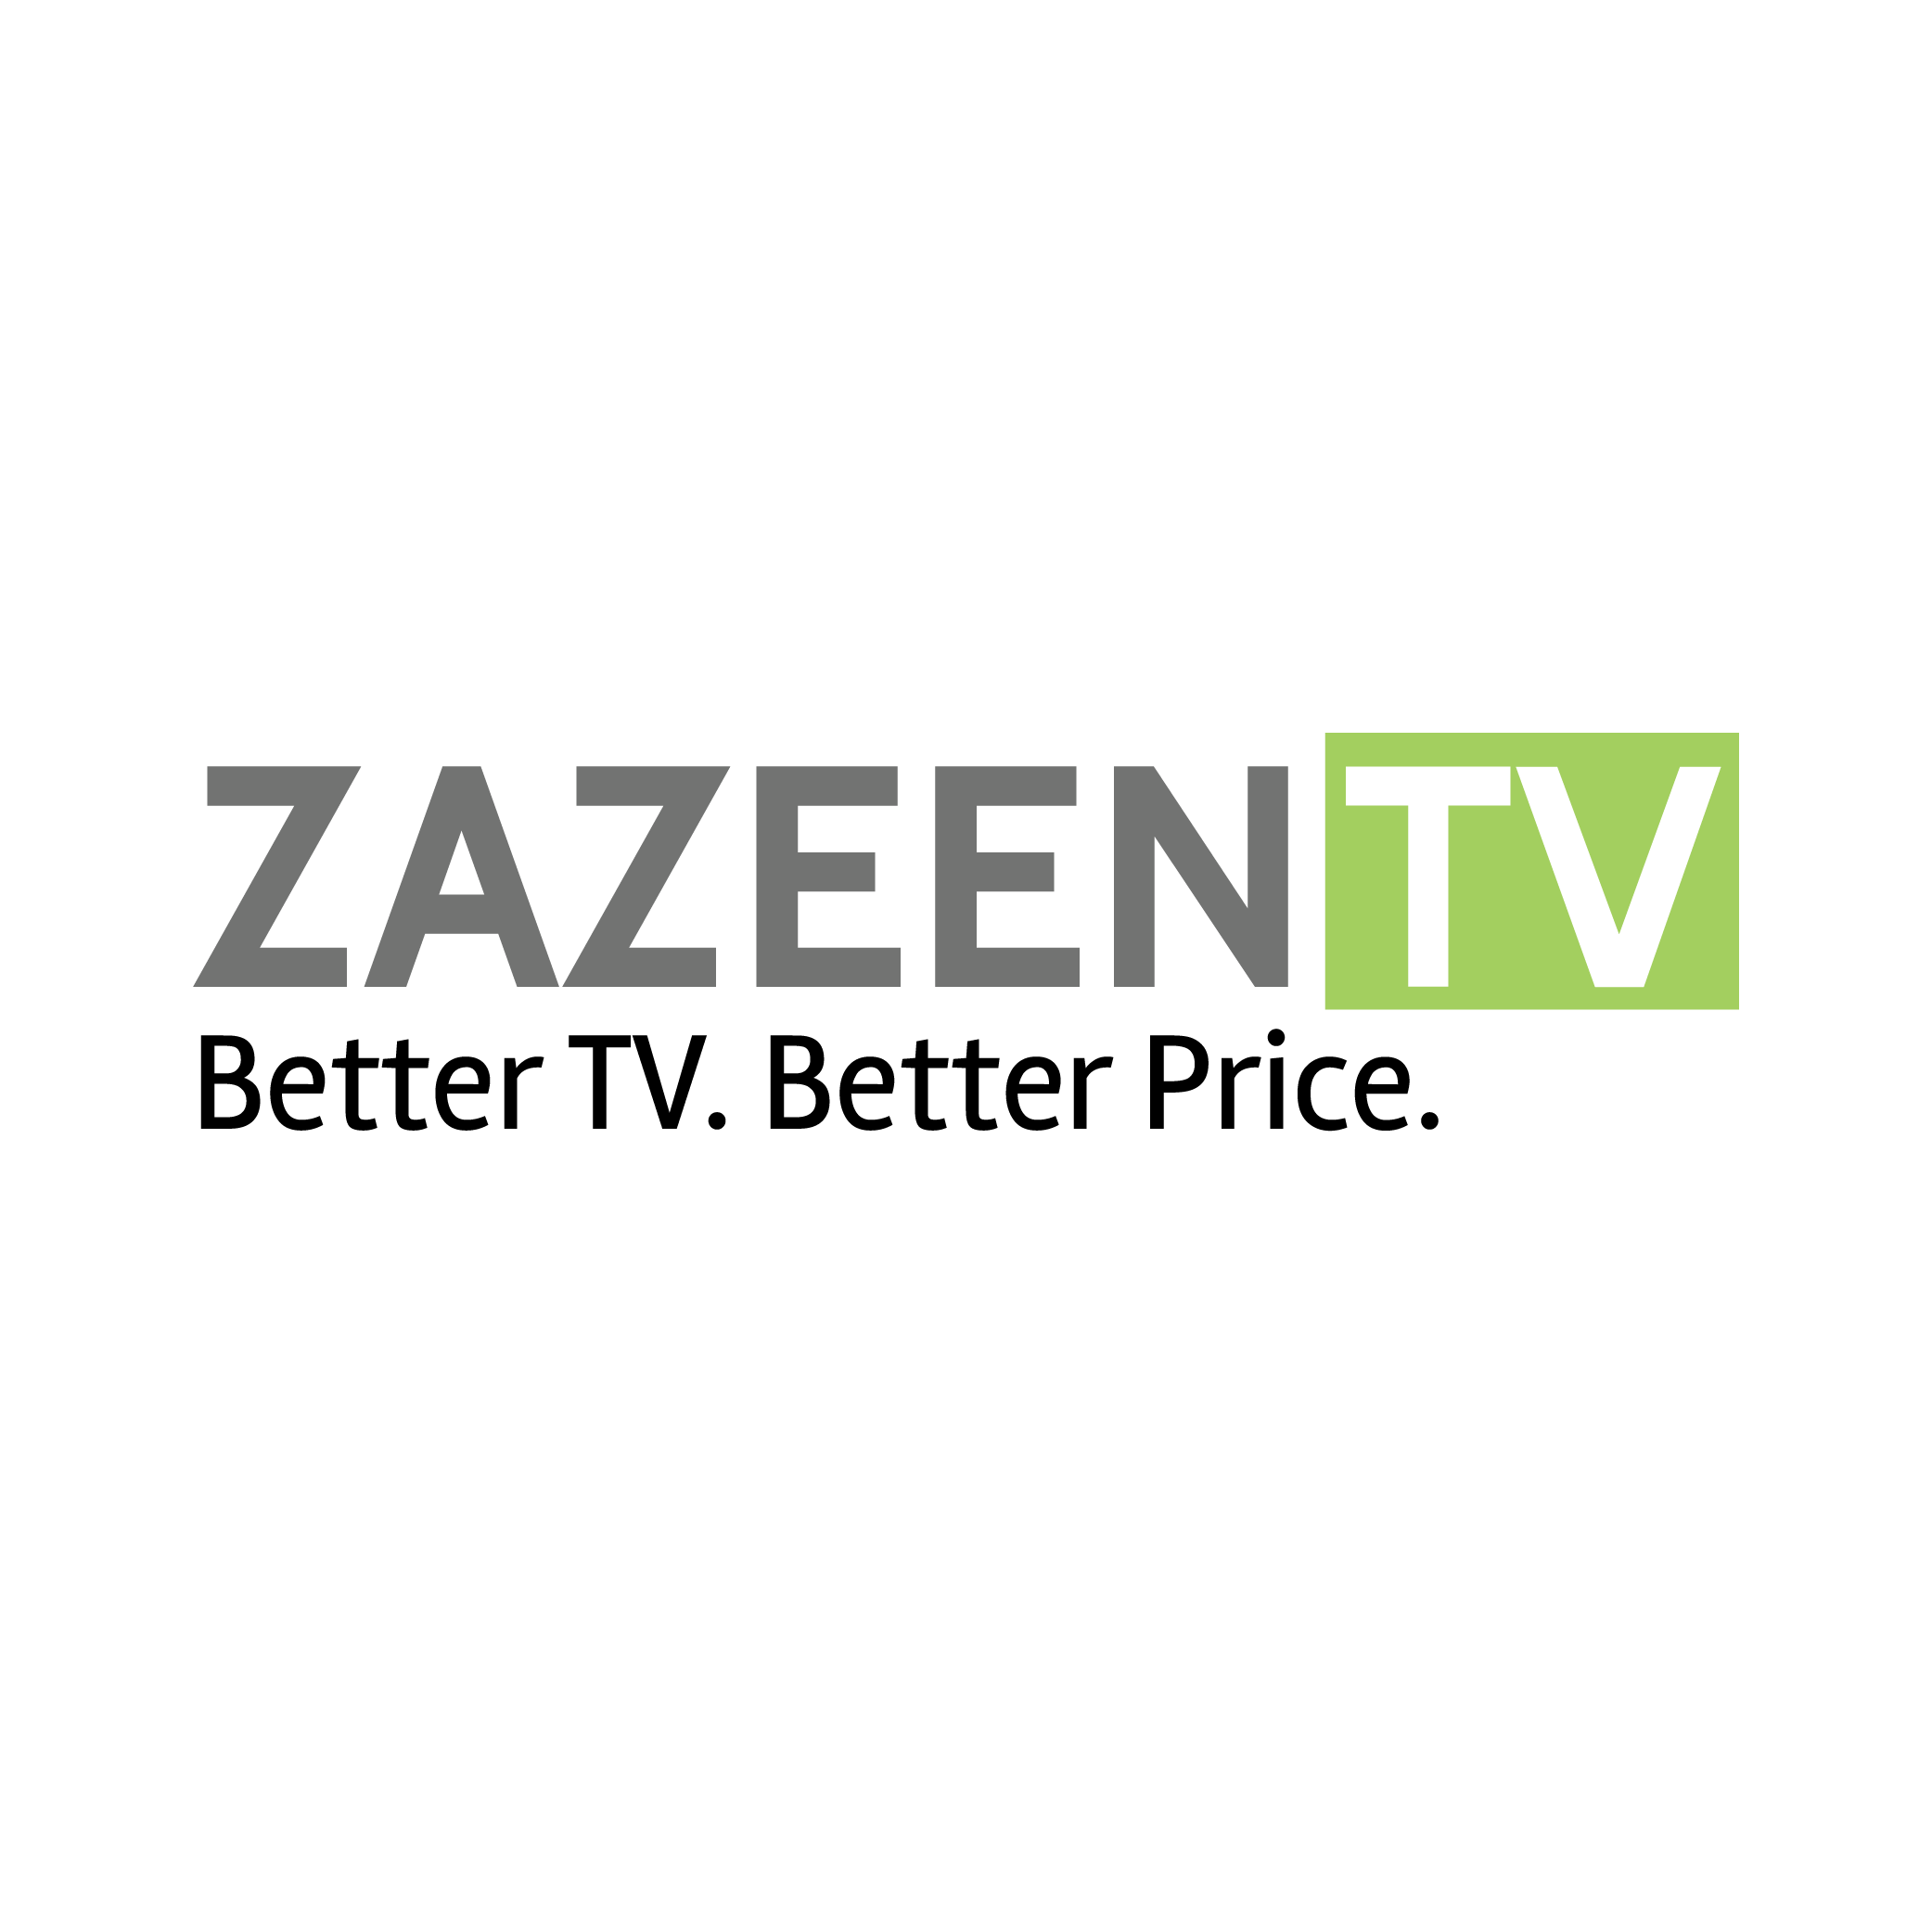 Zazeen TV is an Alternative to the other cable tv guys in Ont/Que. We have what you want and need in a TV service provider. Better TV. Better Price.